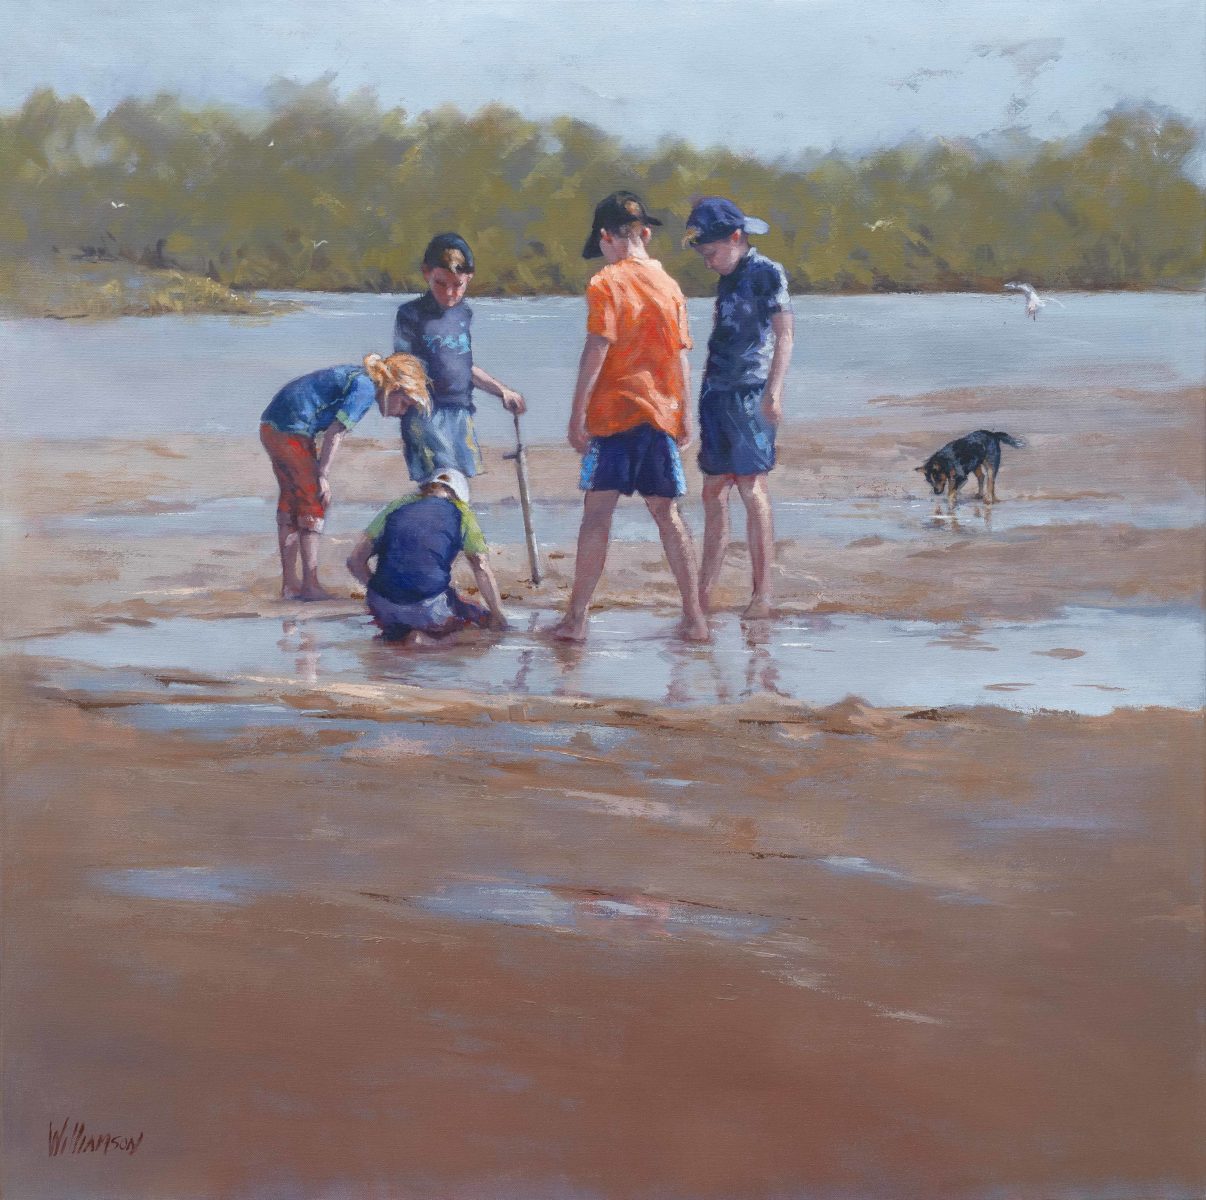 At the Lake, Narrabeen | Jan Williamson | Oil on canvas | 91 x 91 cm | SOLD